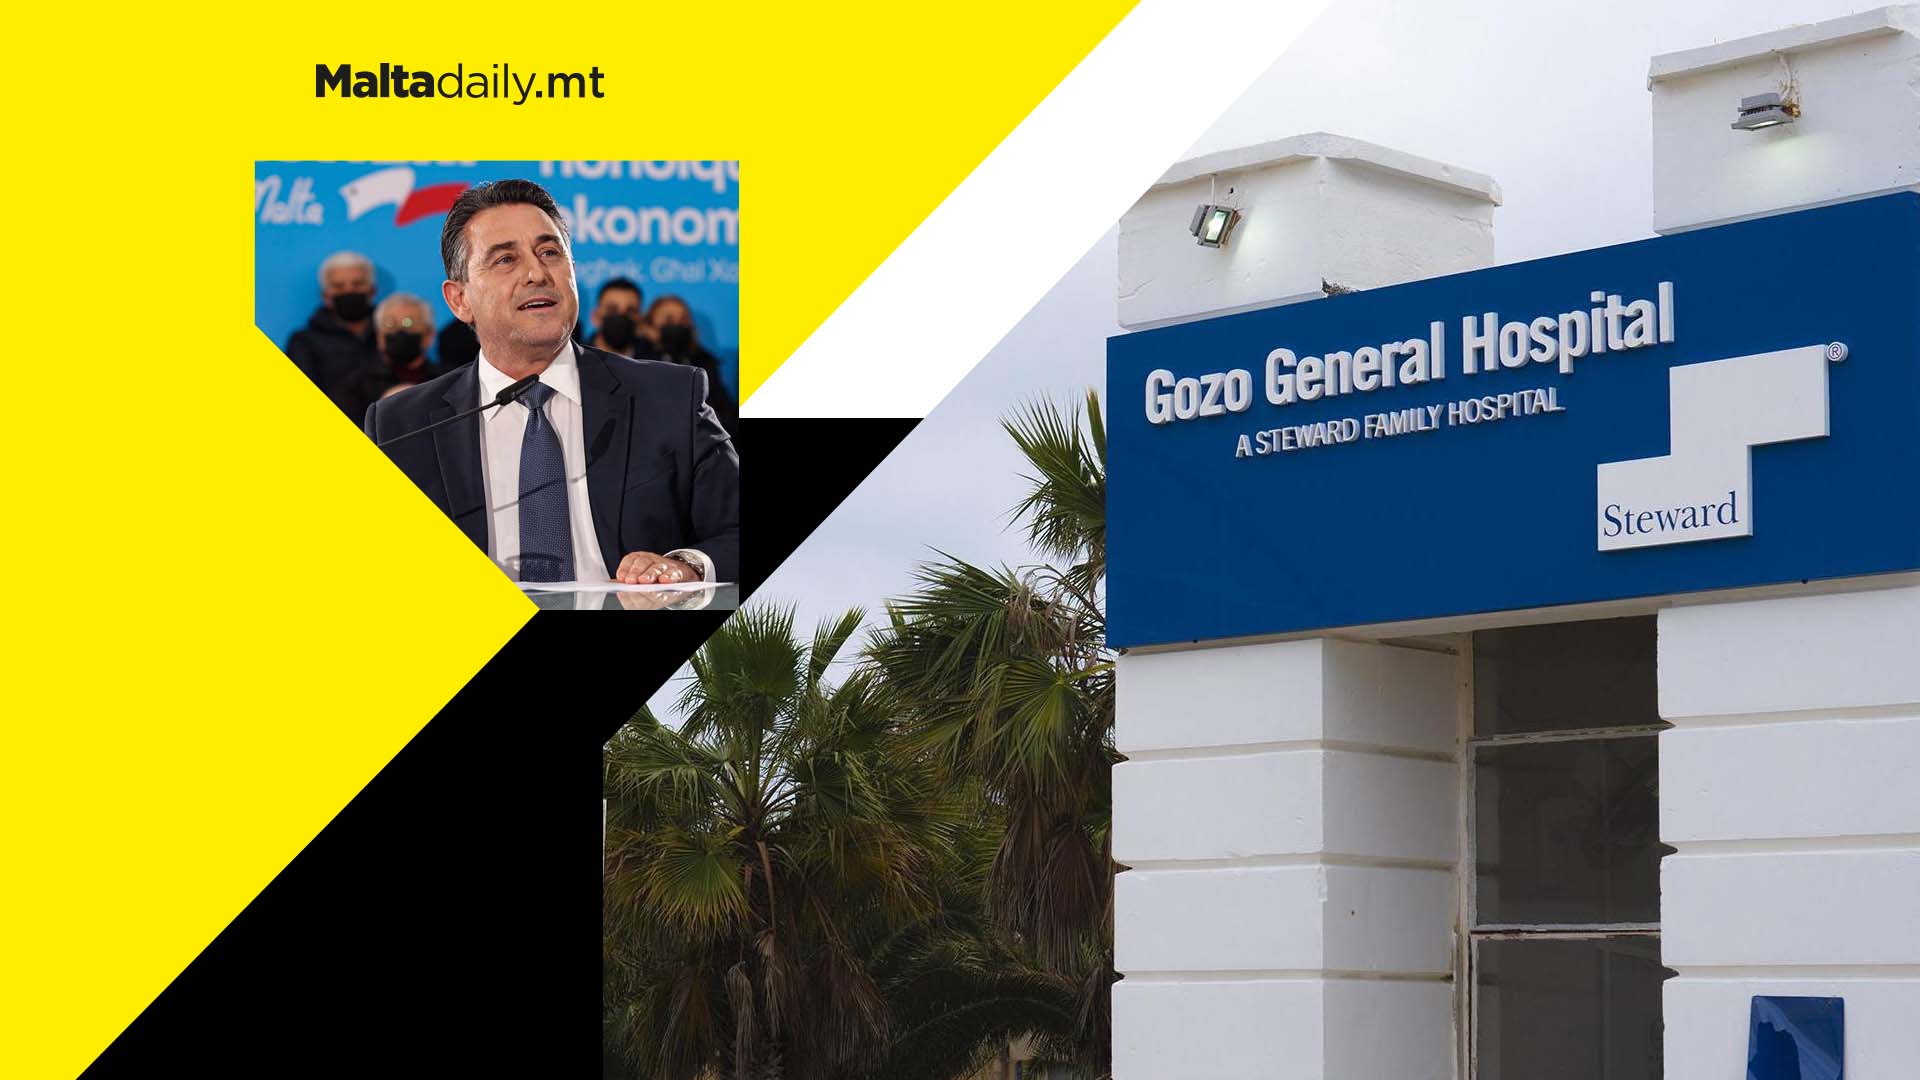 Nationalist Party want to terminate Gozo hospital privatisation